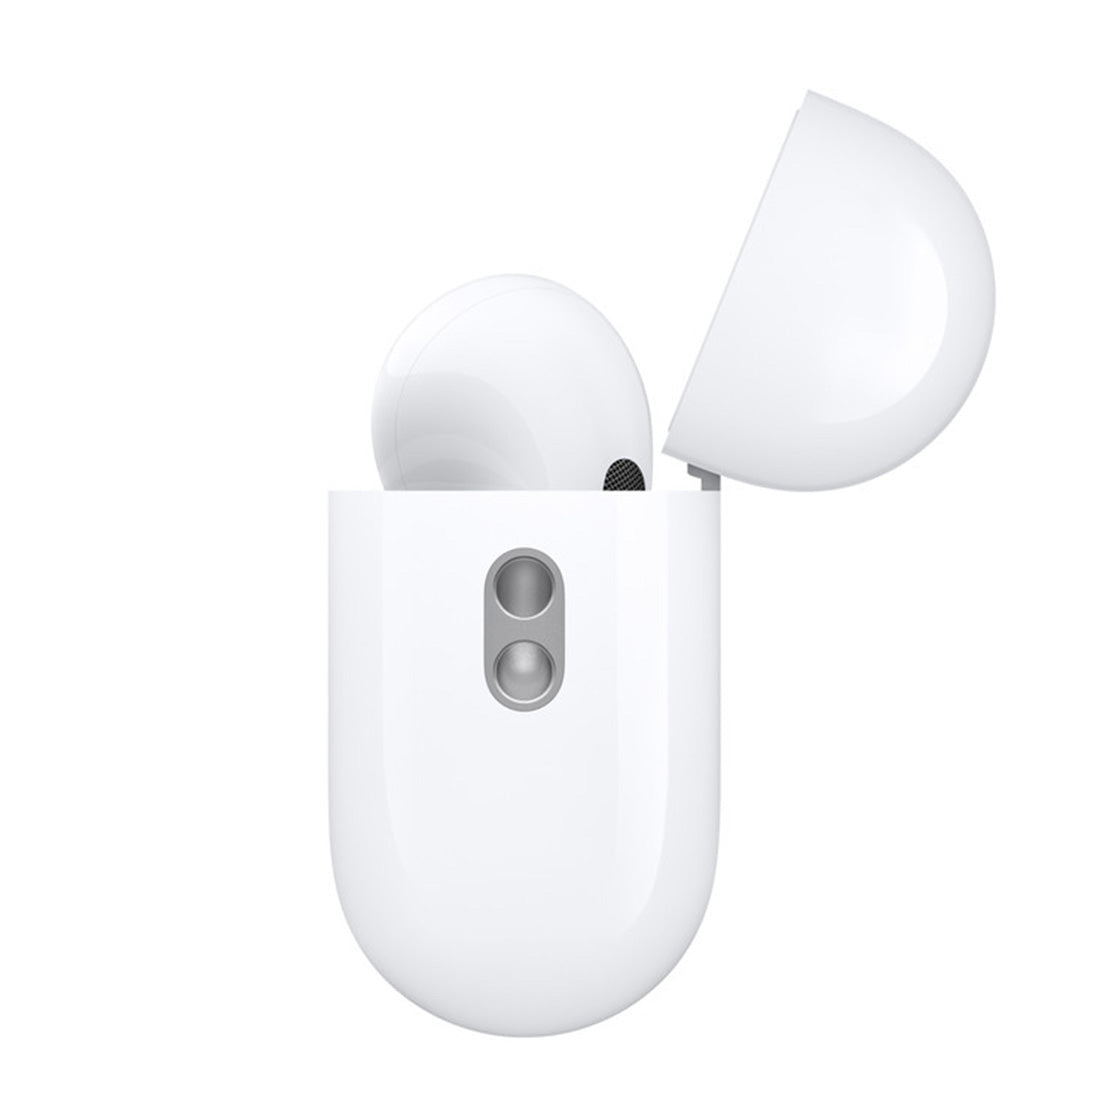 Magical profile, advanced features, AirPods Pro elegance